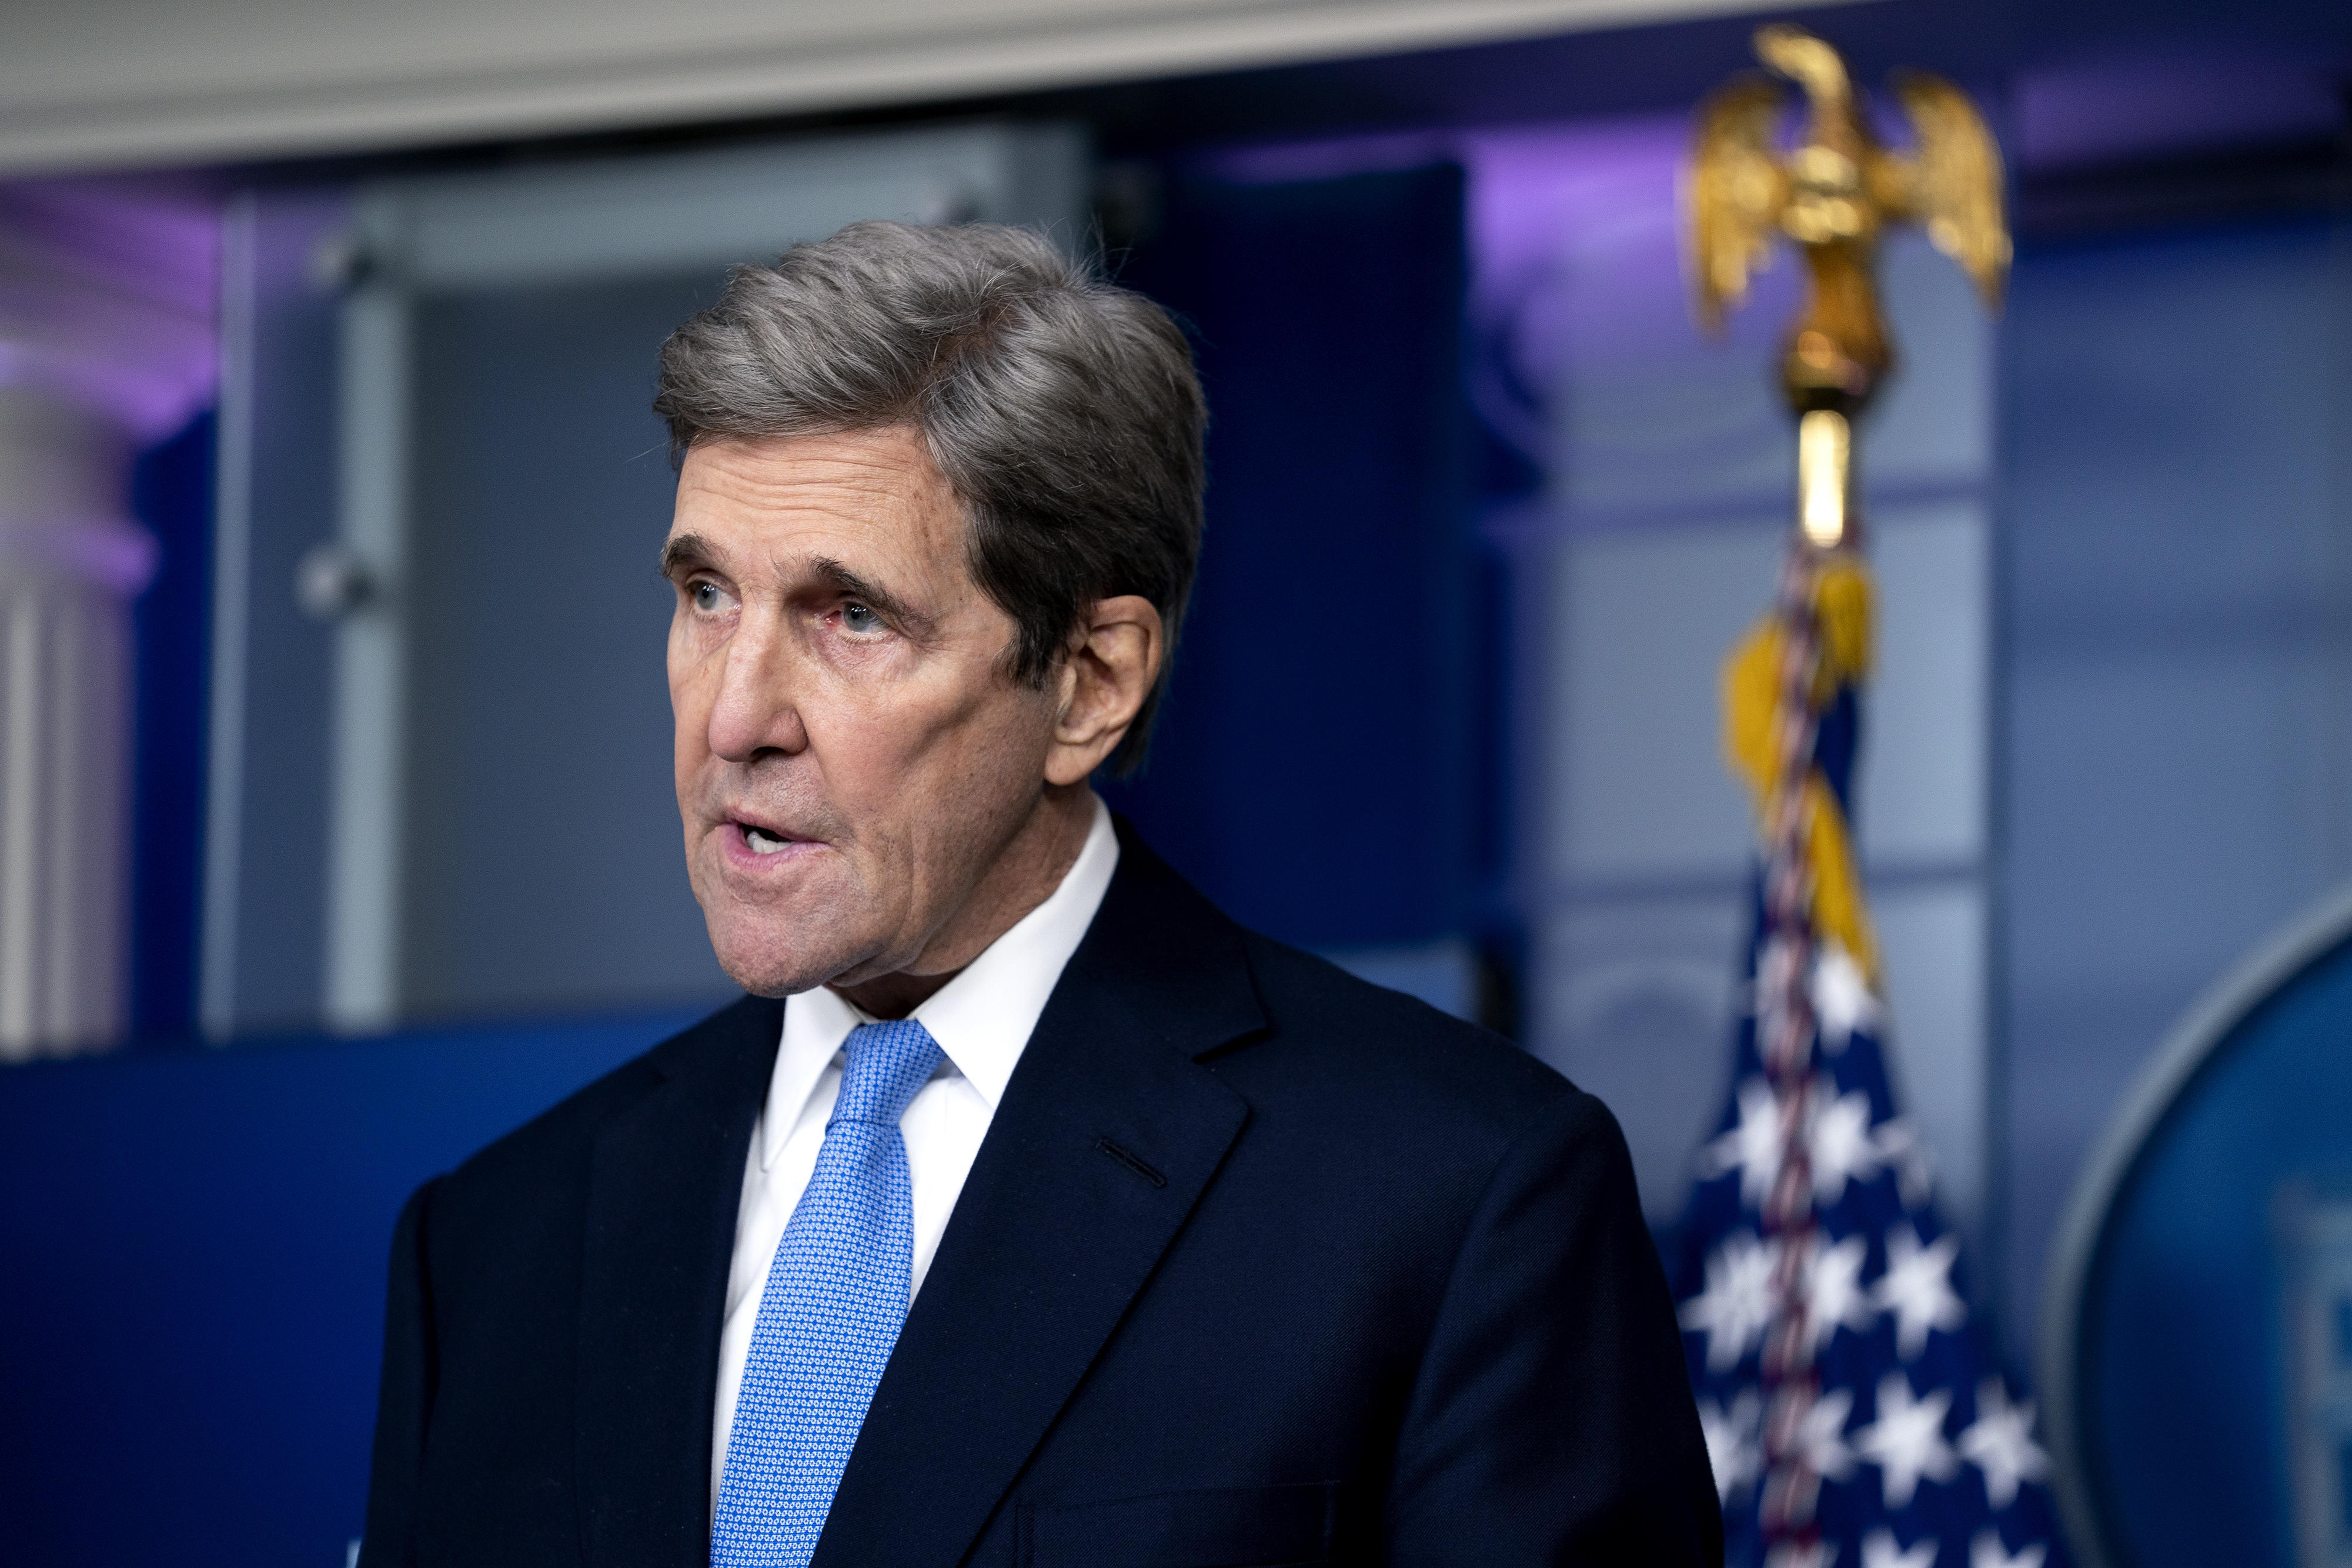 Kerry says Earth has 9 years to avert worst consequences of climate crisis 